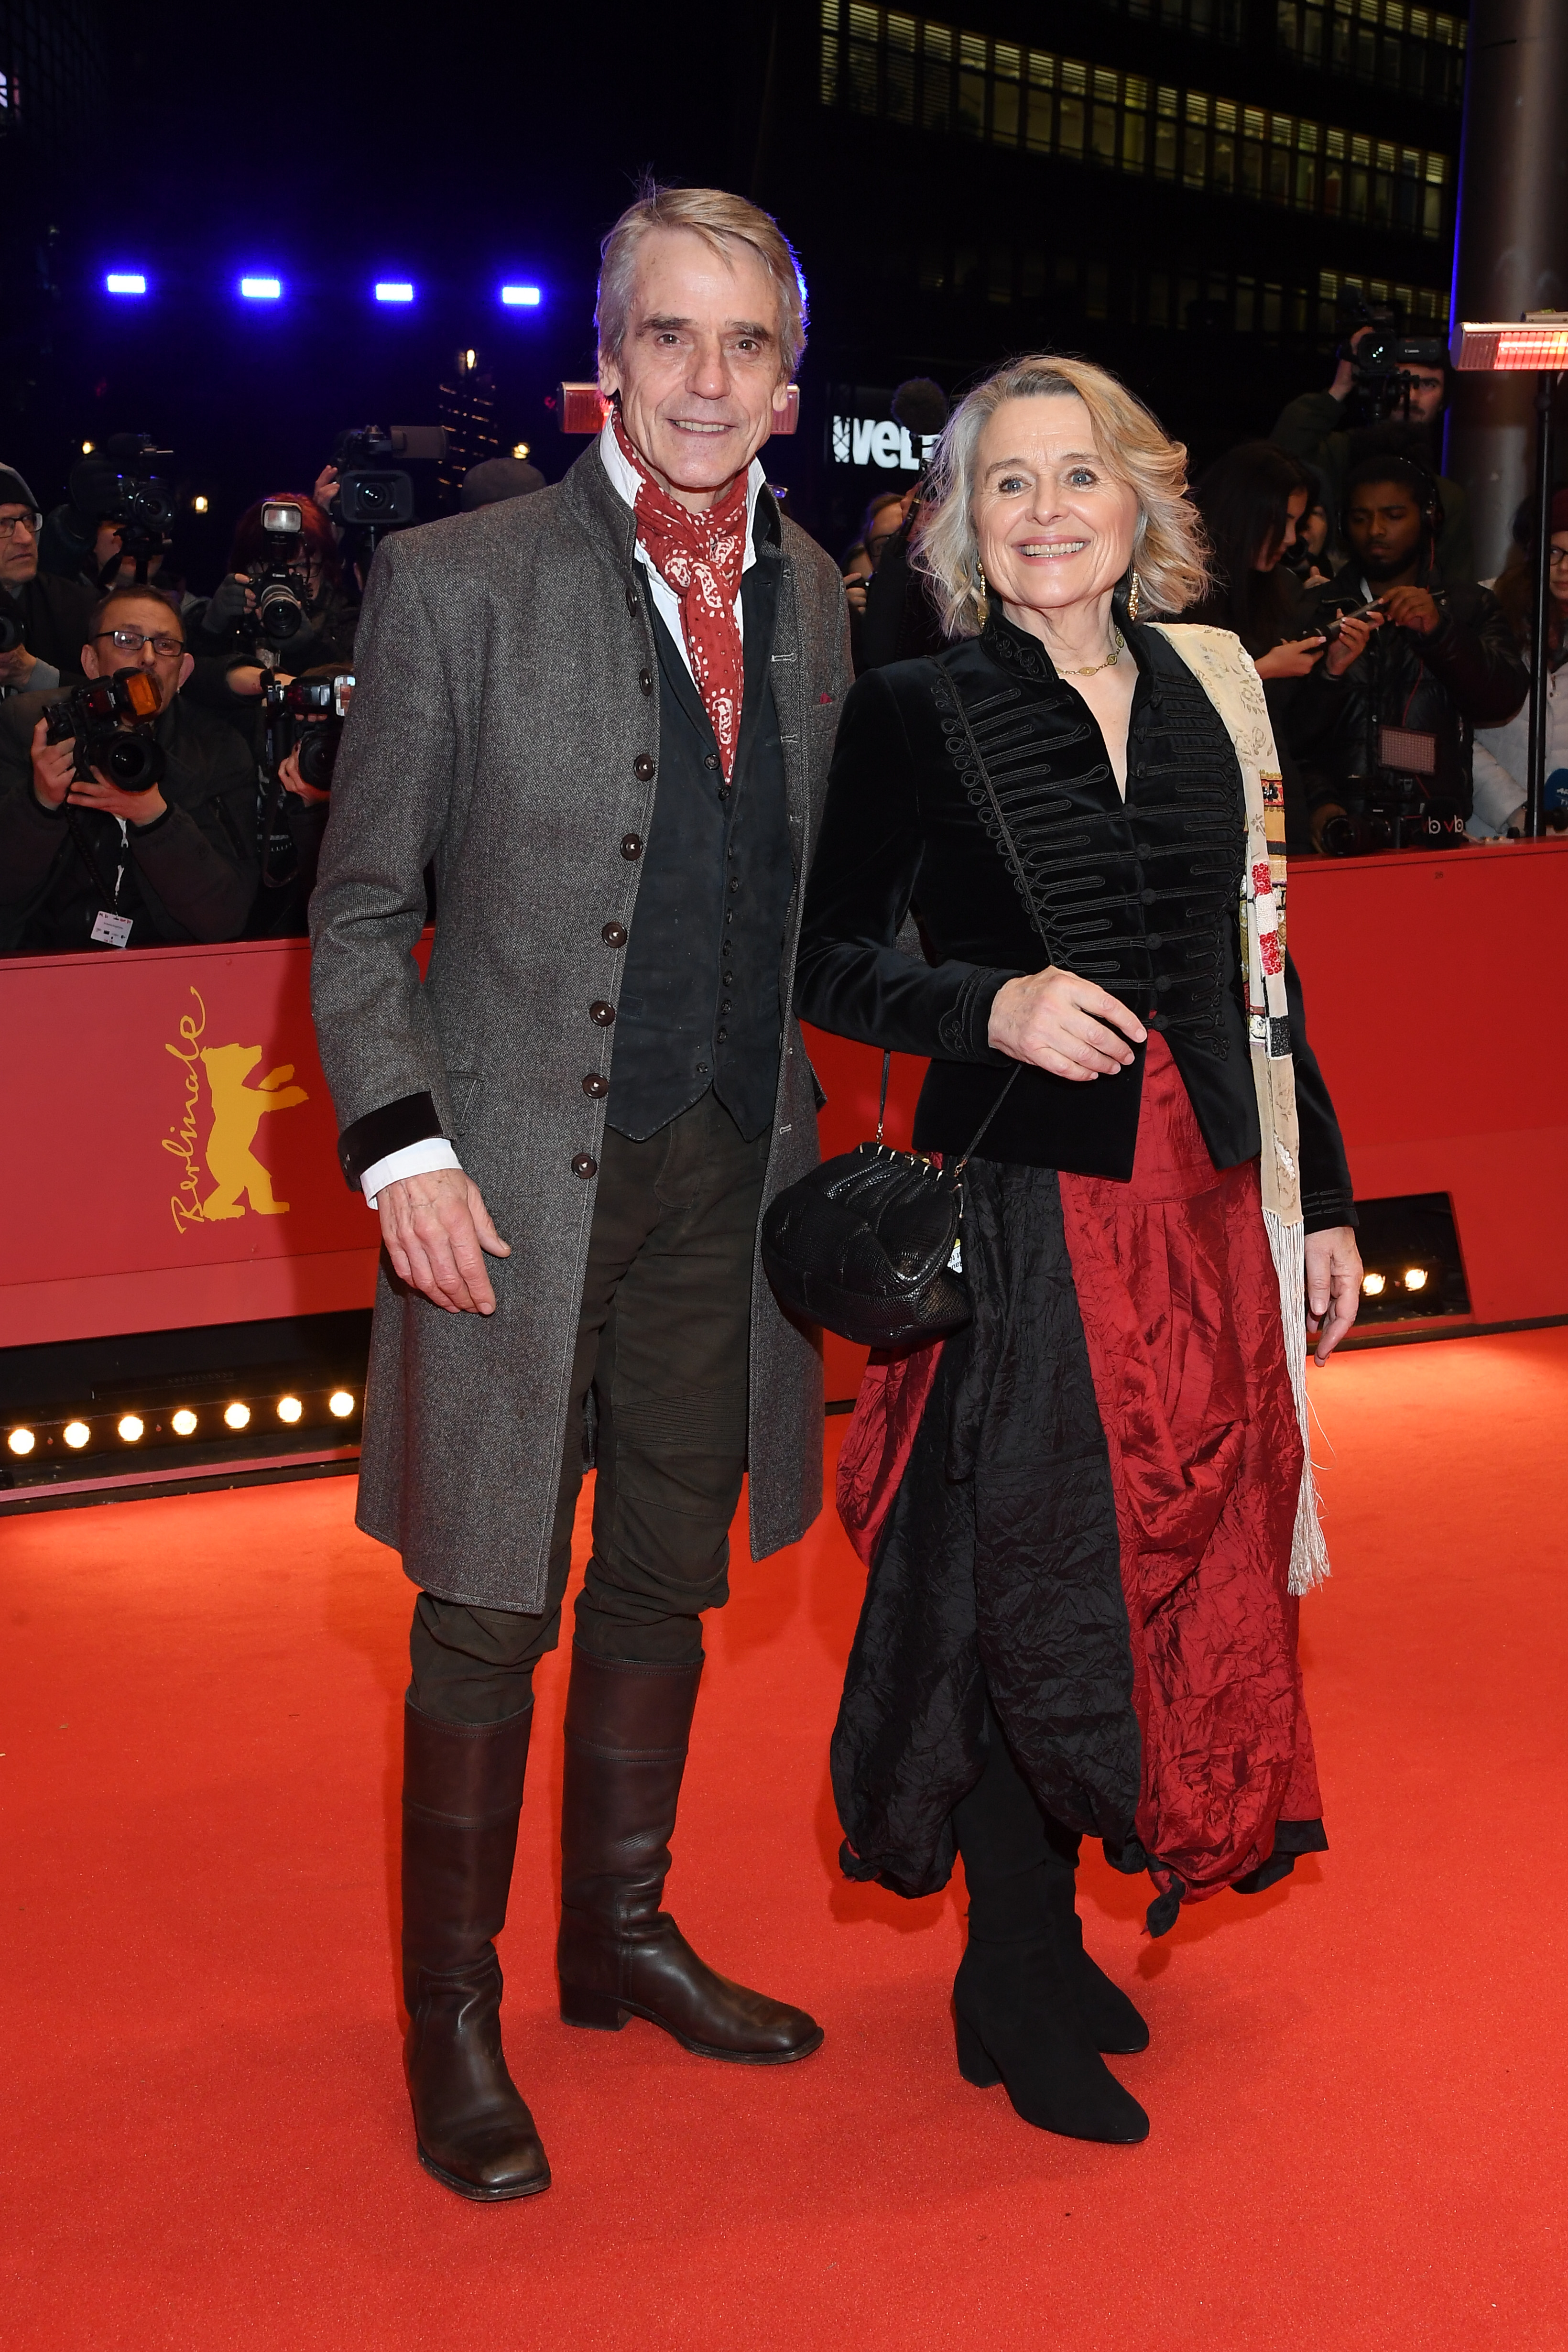 Jeremy Irons and Sinead Cusack on February 20, 2020, in Berlin, Germany. | Source: Getty Images